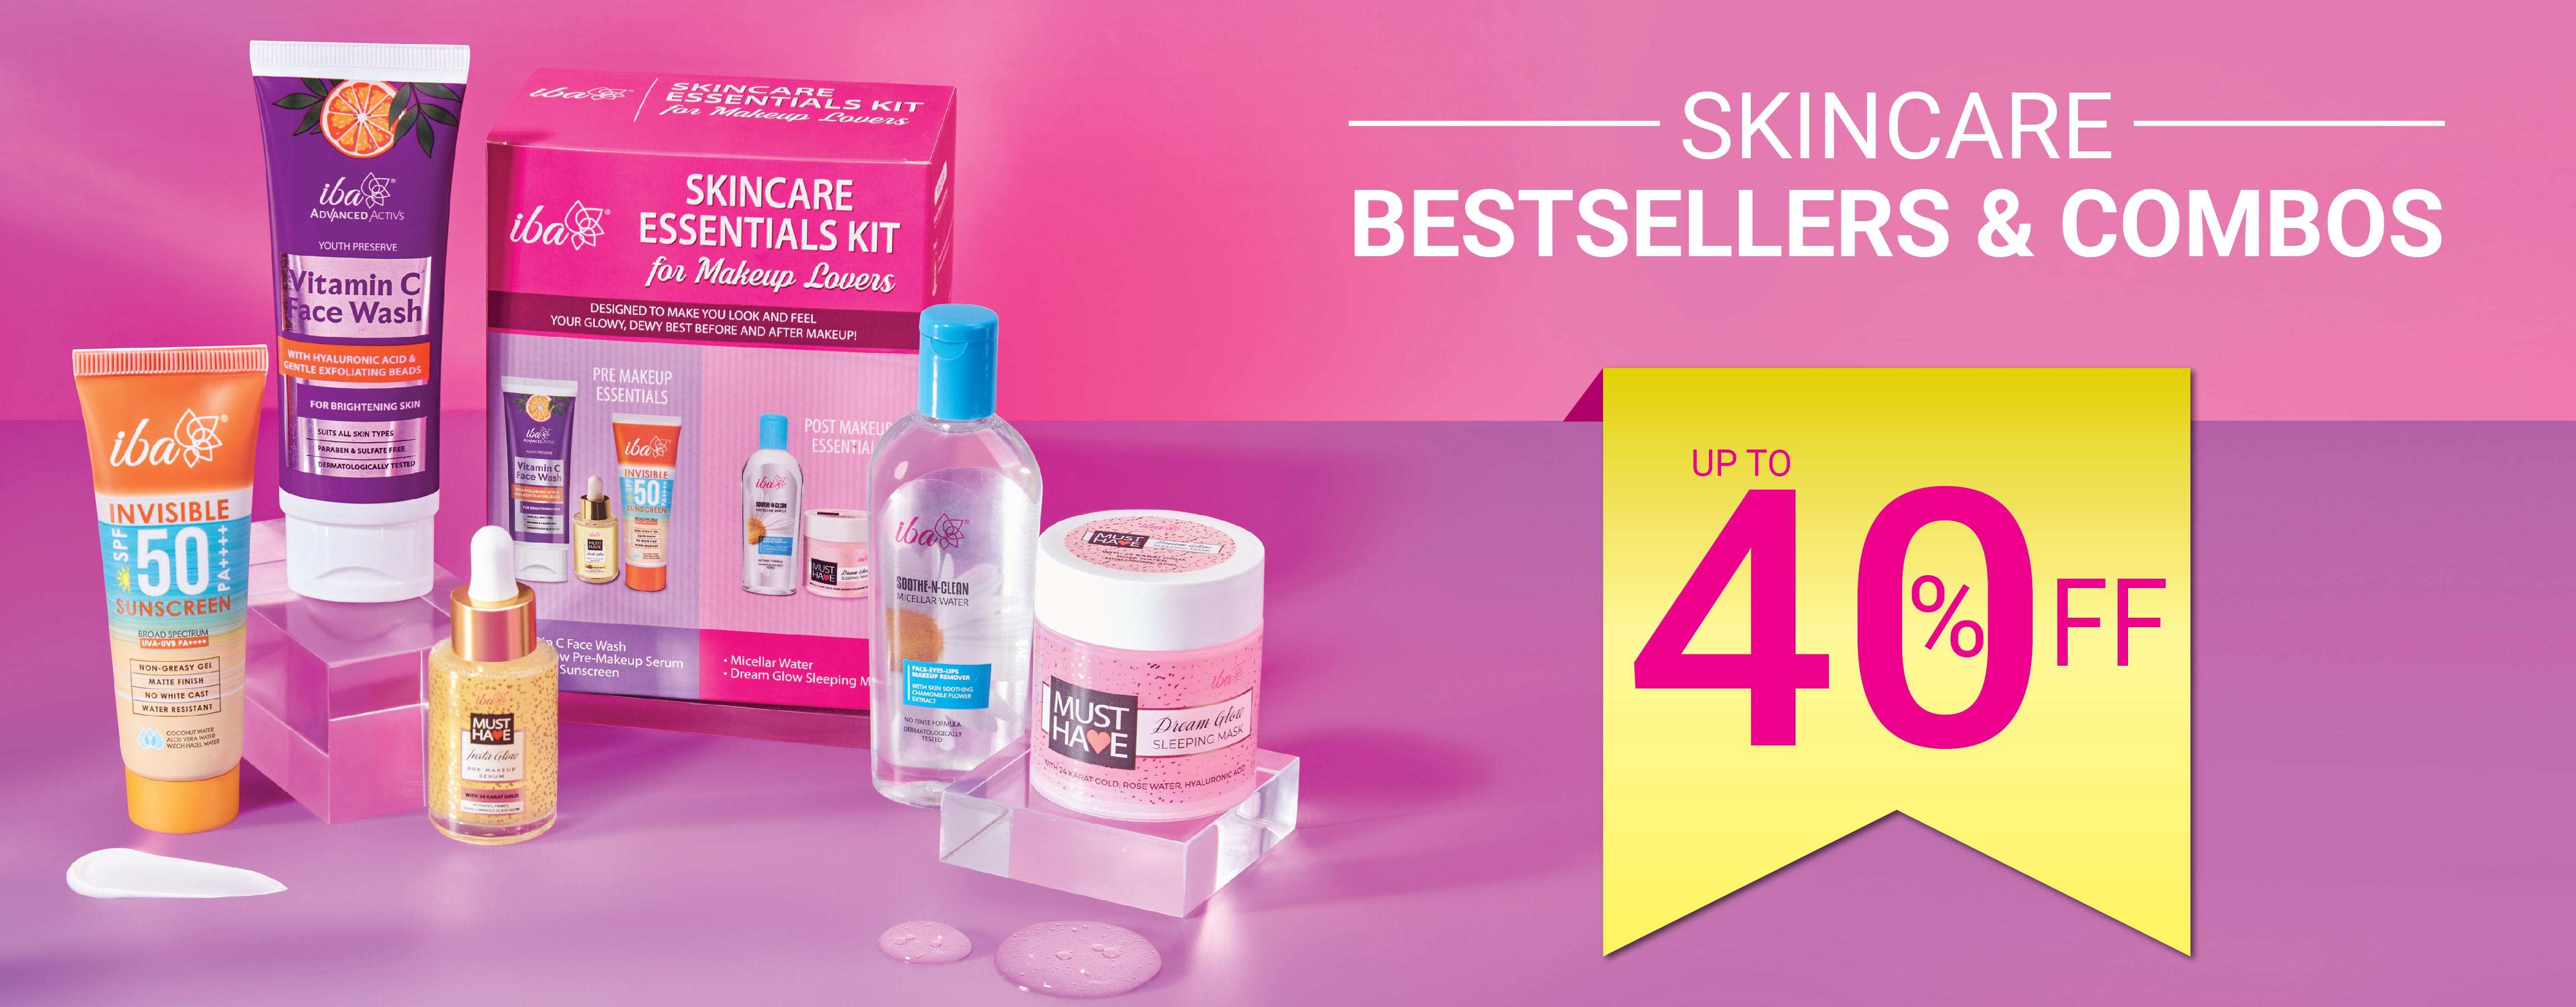 Discounts on Skincare Products